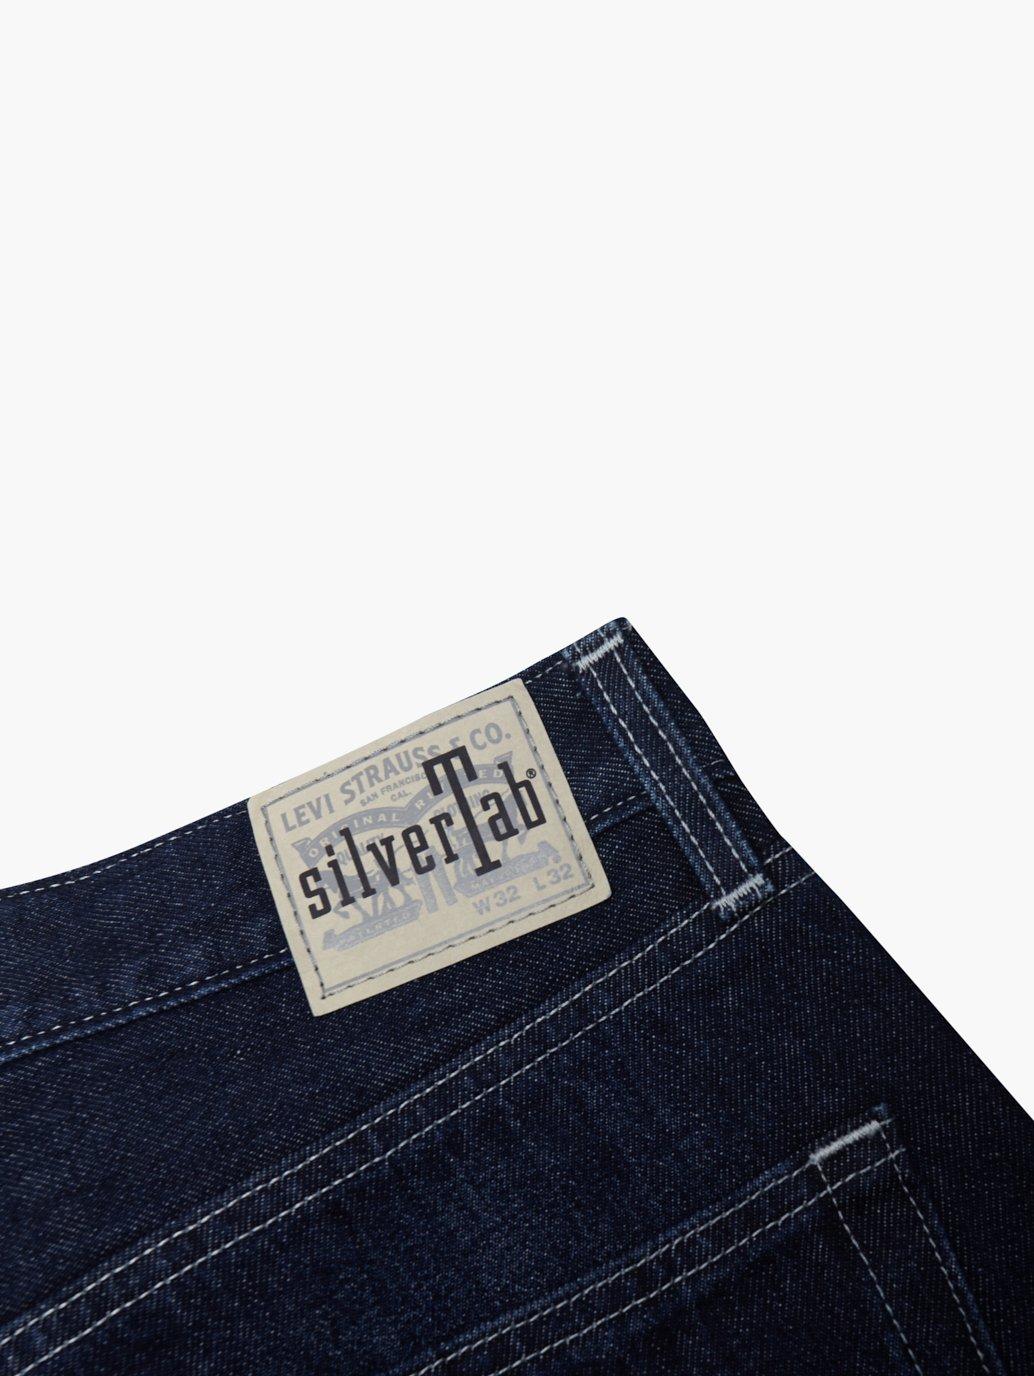 Buy Levi's® Men's SilverTab™ Straight Jeans | Levi's® Official